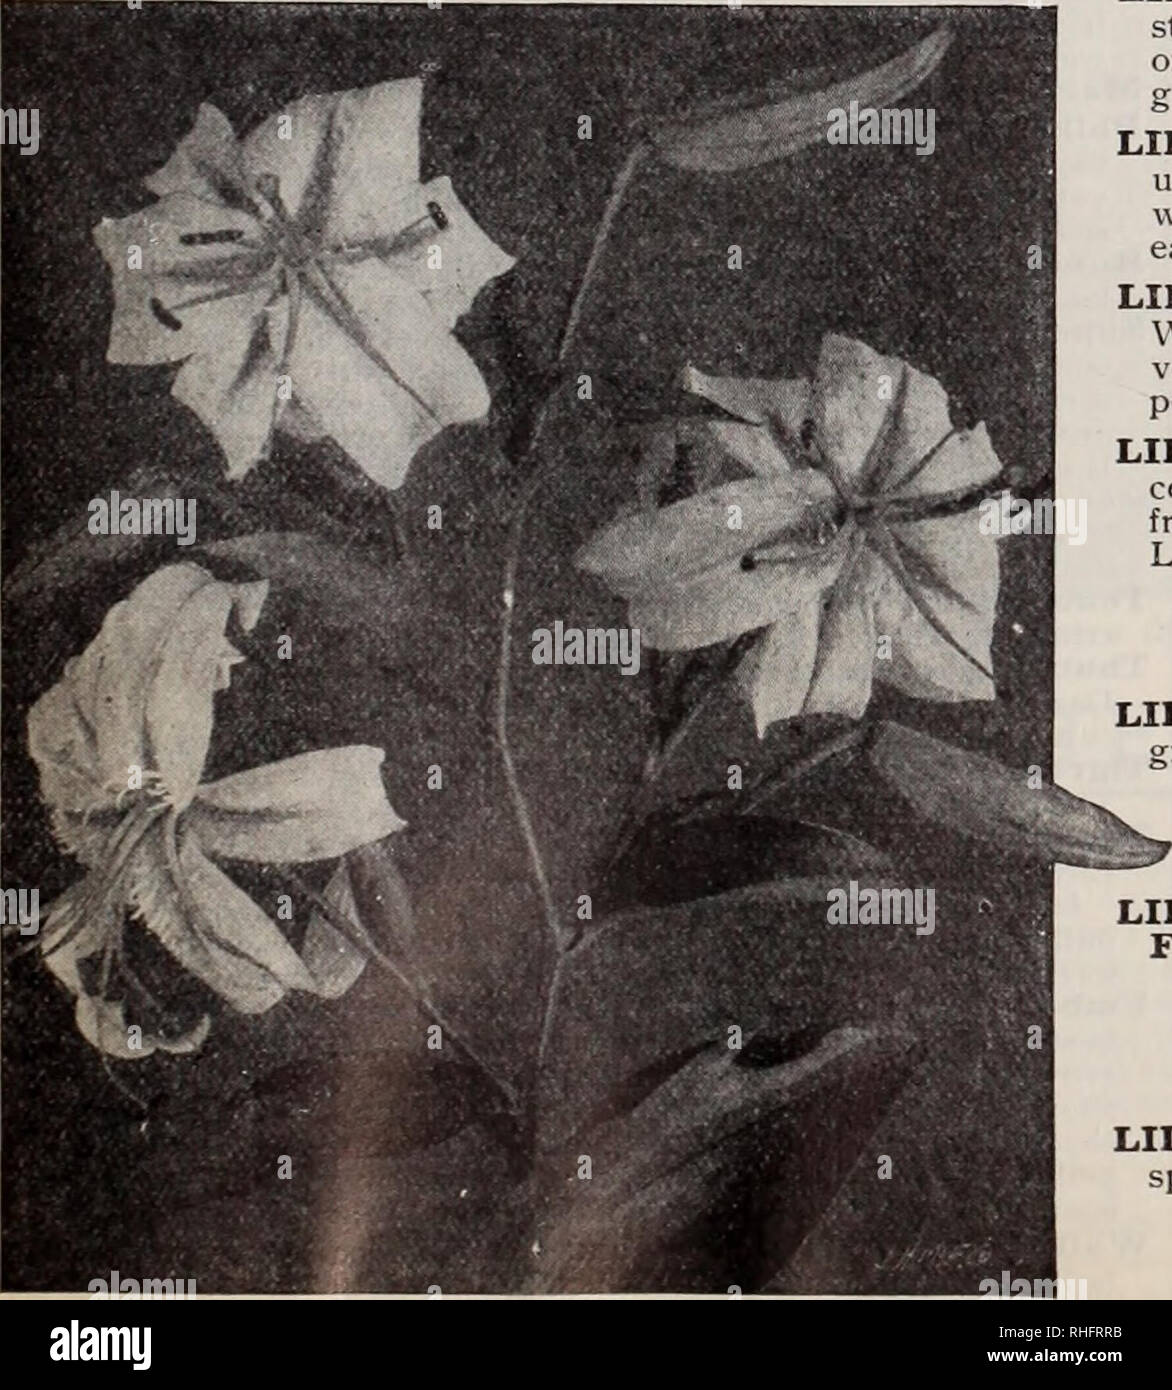 . Boddington's quality bulbs, seeds and plants / Arthur T. Boddington.. Nursery Catalogue. Lilium auratum (tjpe) RARE LILIUM AURATUMS LIL.IUM AURATUM PICTUM. A very choice type of Lilium aurahivi; pure white, with red and yellow bands Fach Doz ico through each petal. 8- to 9-inch bulbs $0 20 $2 00 $15 00 LILIUM AURATUM PLATYPHYLLUM. A very strong and vigorous type of L. aiiratioit. Flowers of immense size, pure ivory-while, with a deep golden band through each petal. 9- to ii-inch bulbs.. LILIUM AURATUM RUBRUM VITTATUM. A unique variety; flowers 10 to 12 inches across, ivory- white, with broad Stock Photo